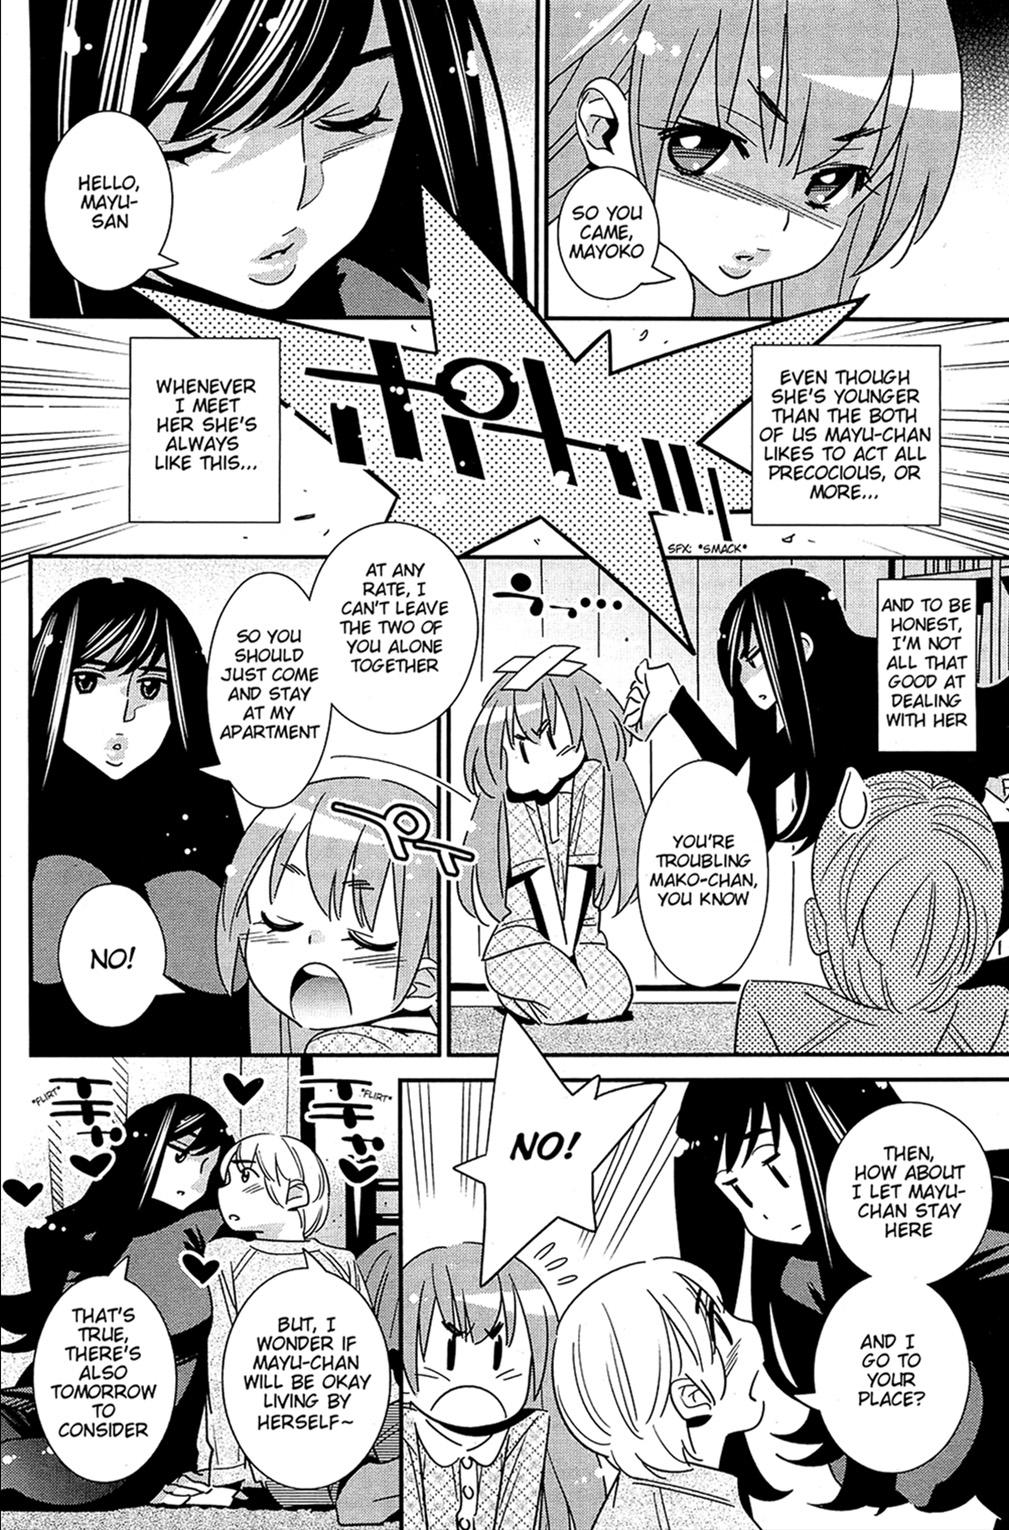 Amature Porn Boku no Haigorei? | The Ghost Behind My Back? Gay Dudes - Page 10